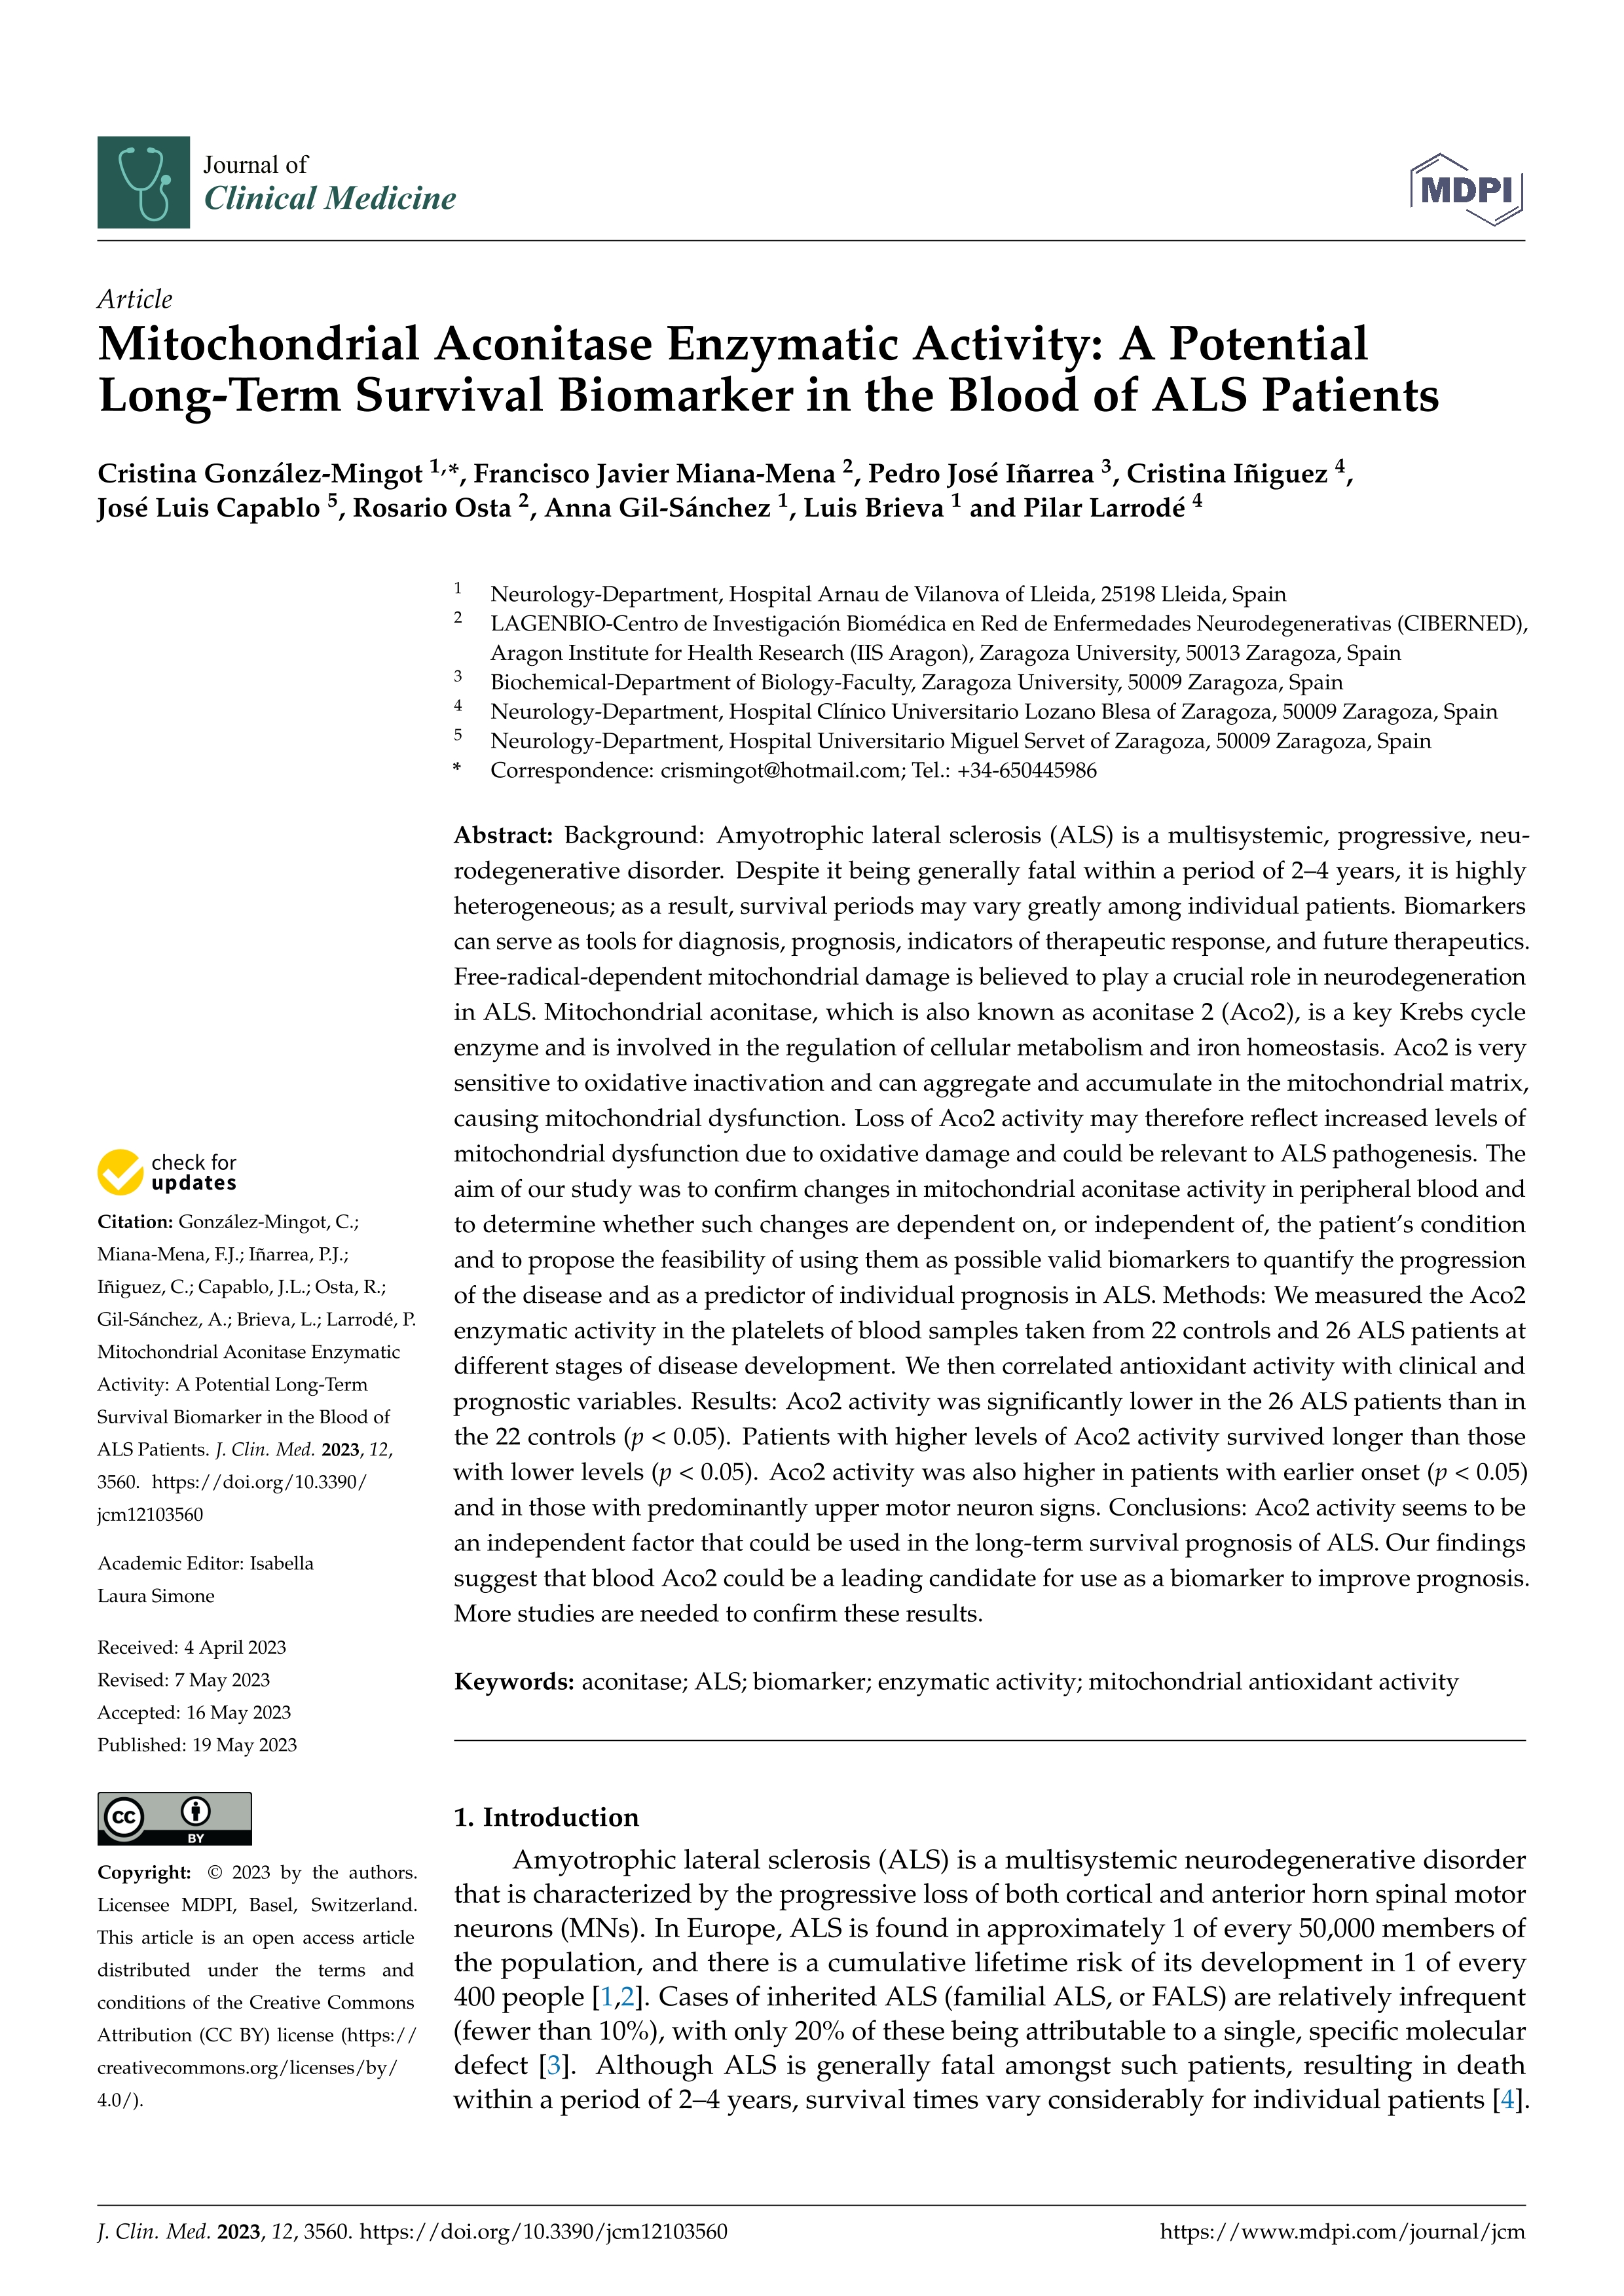 Mitochondrial aconitase enzymatic activity: a potential long-term survival biomarker in the blood of ALS patients